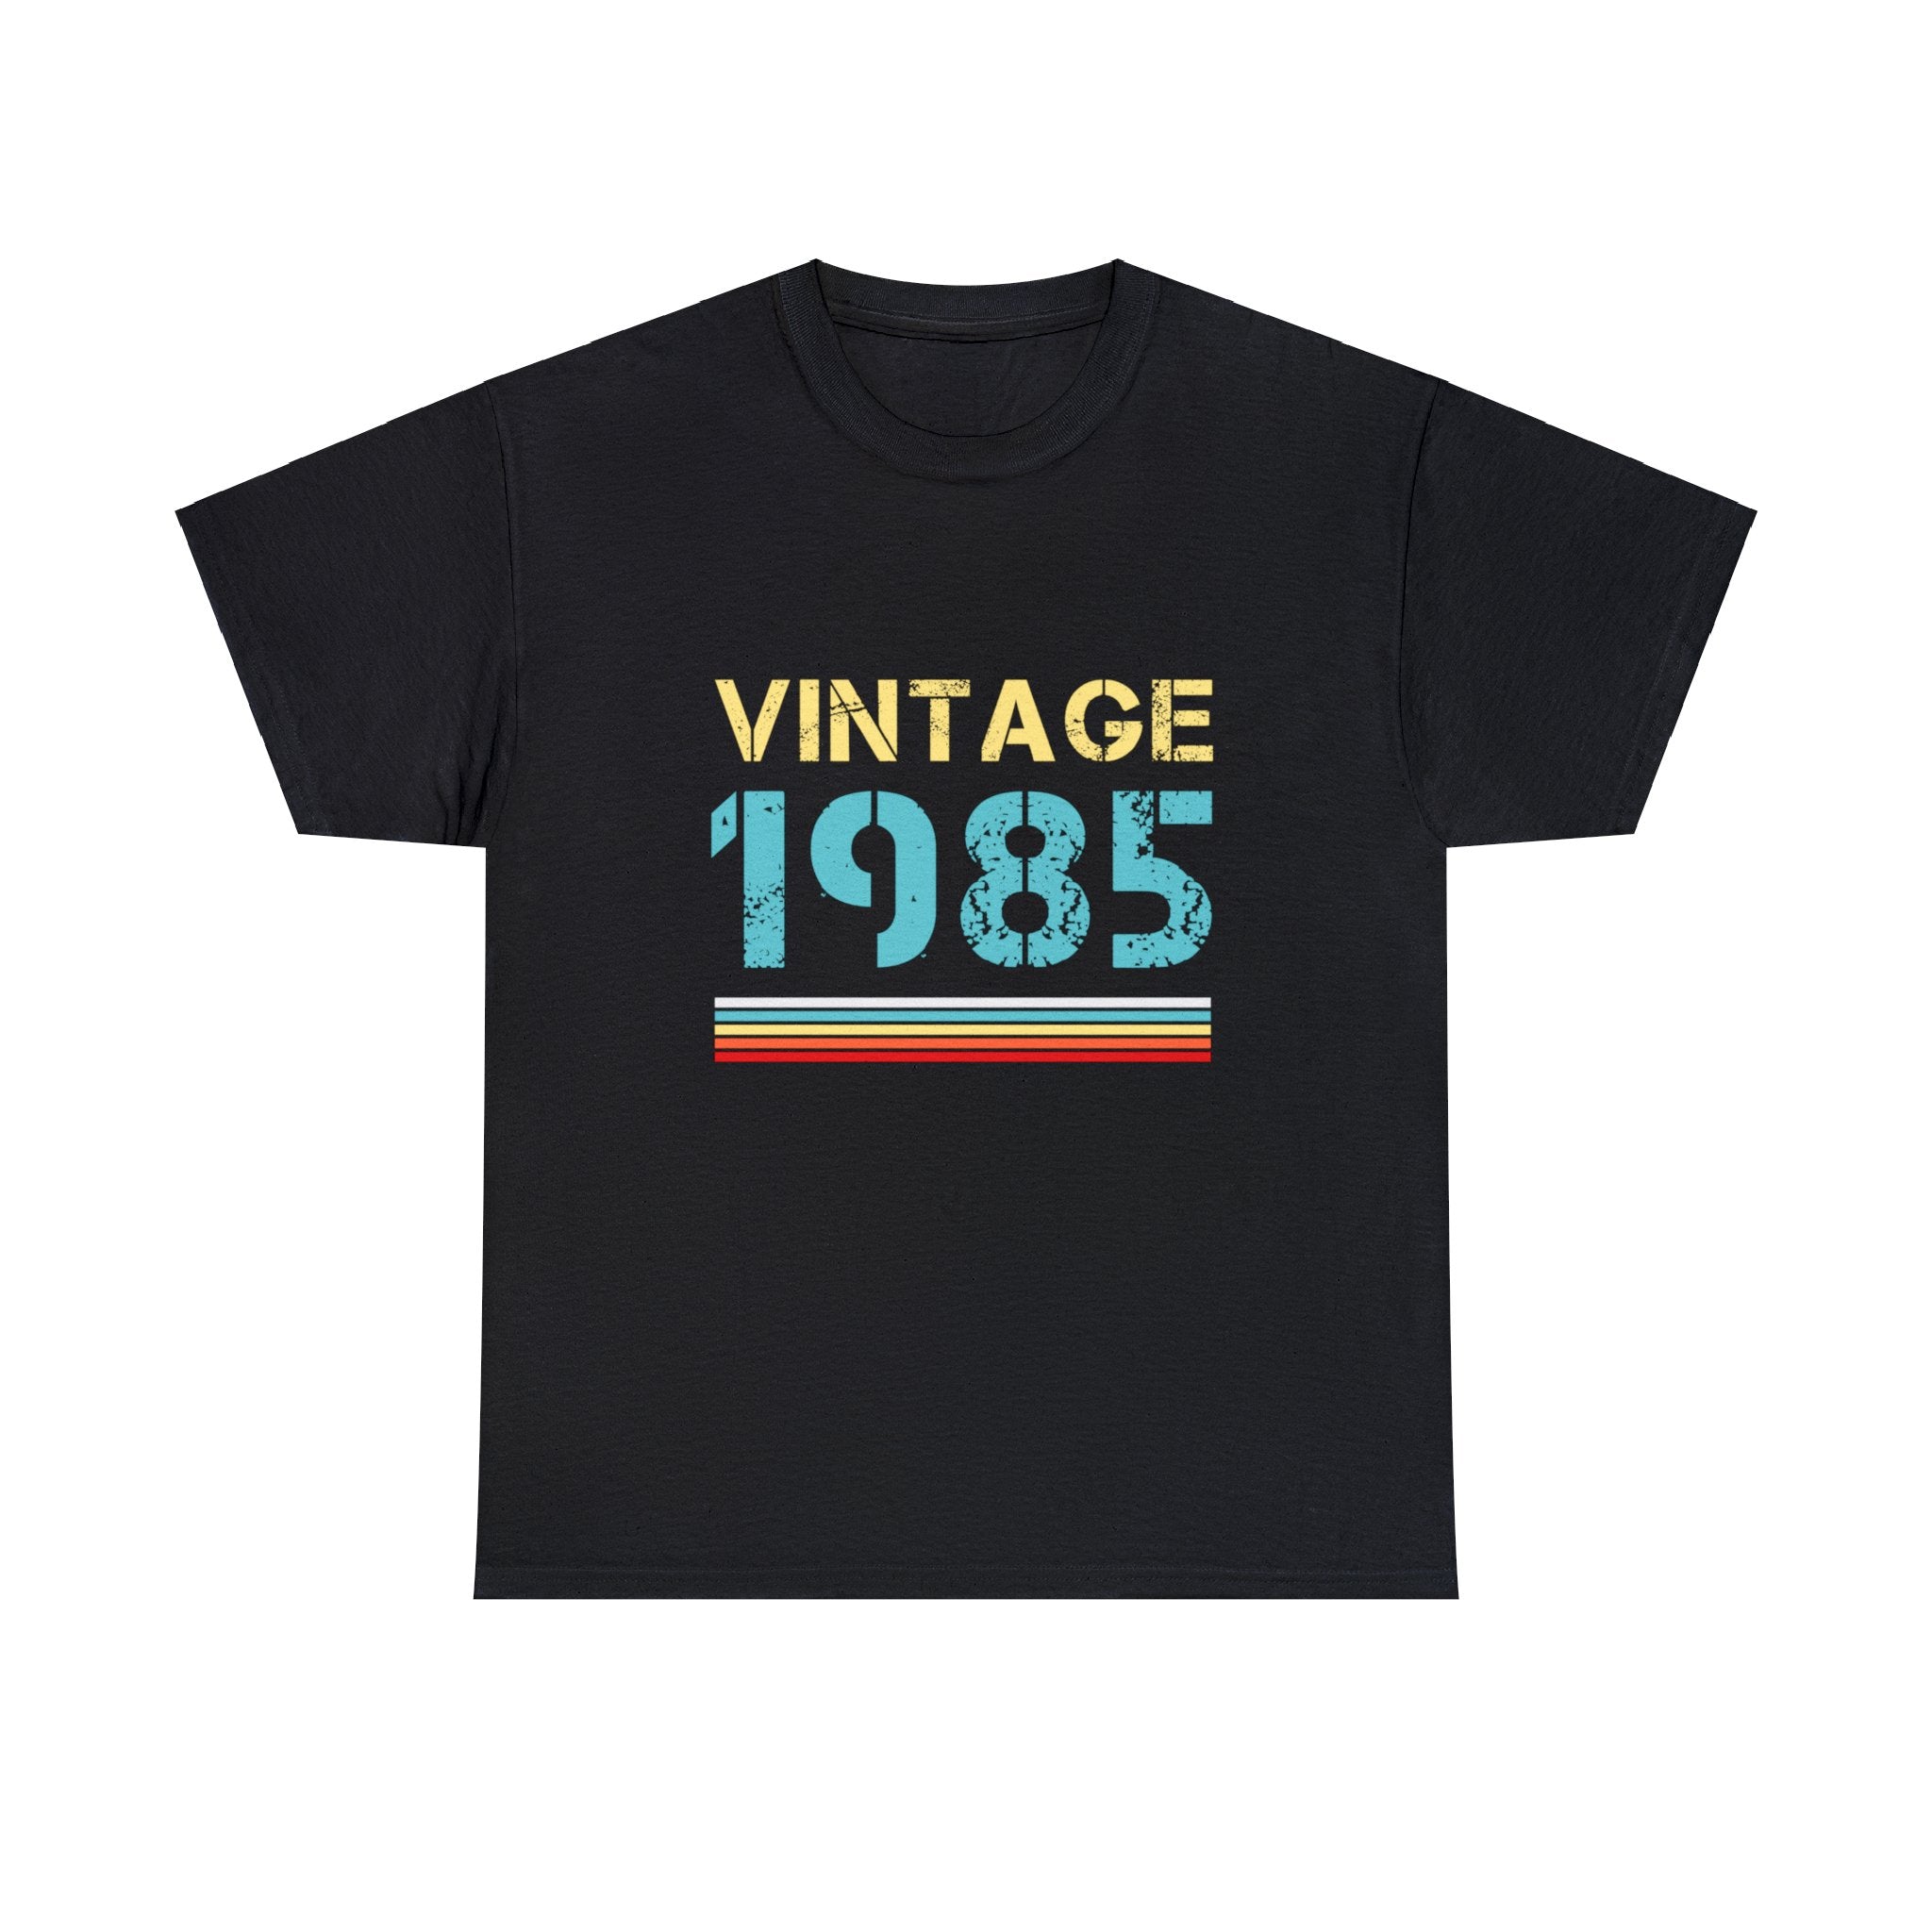 Vintage 1985 T Shirts for Men Retro Funny 1985 Birthday Mens T Shirts Plus Size Big and Tall